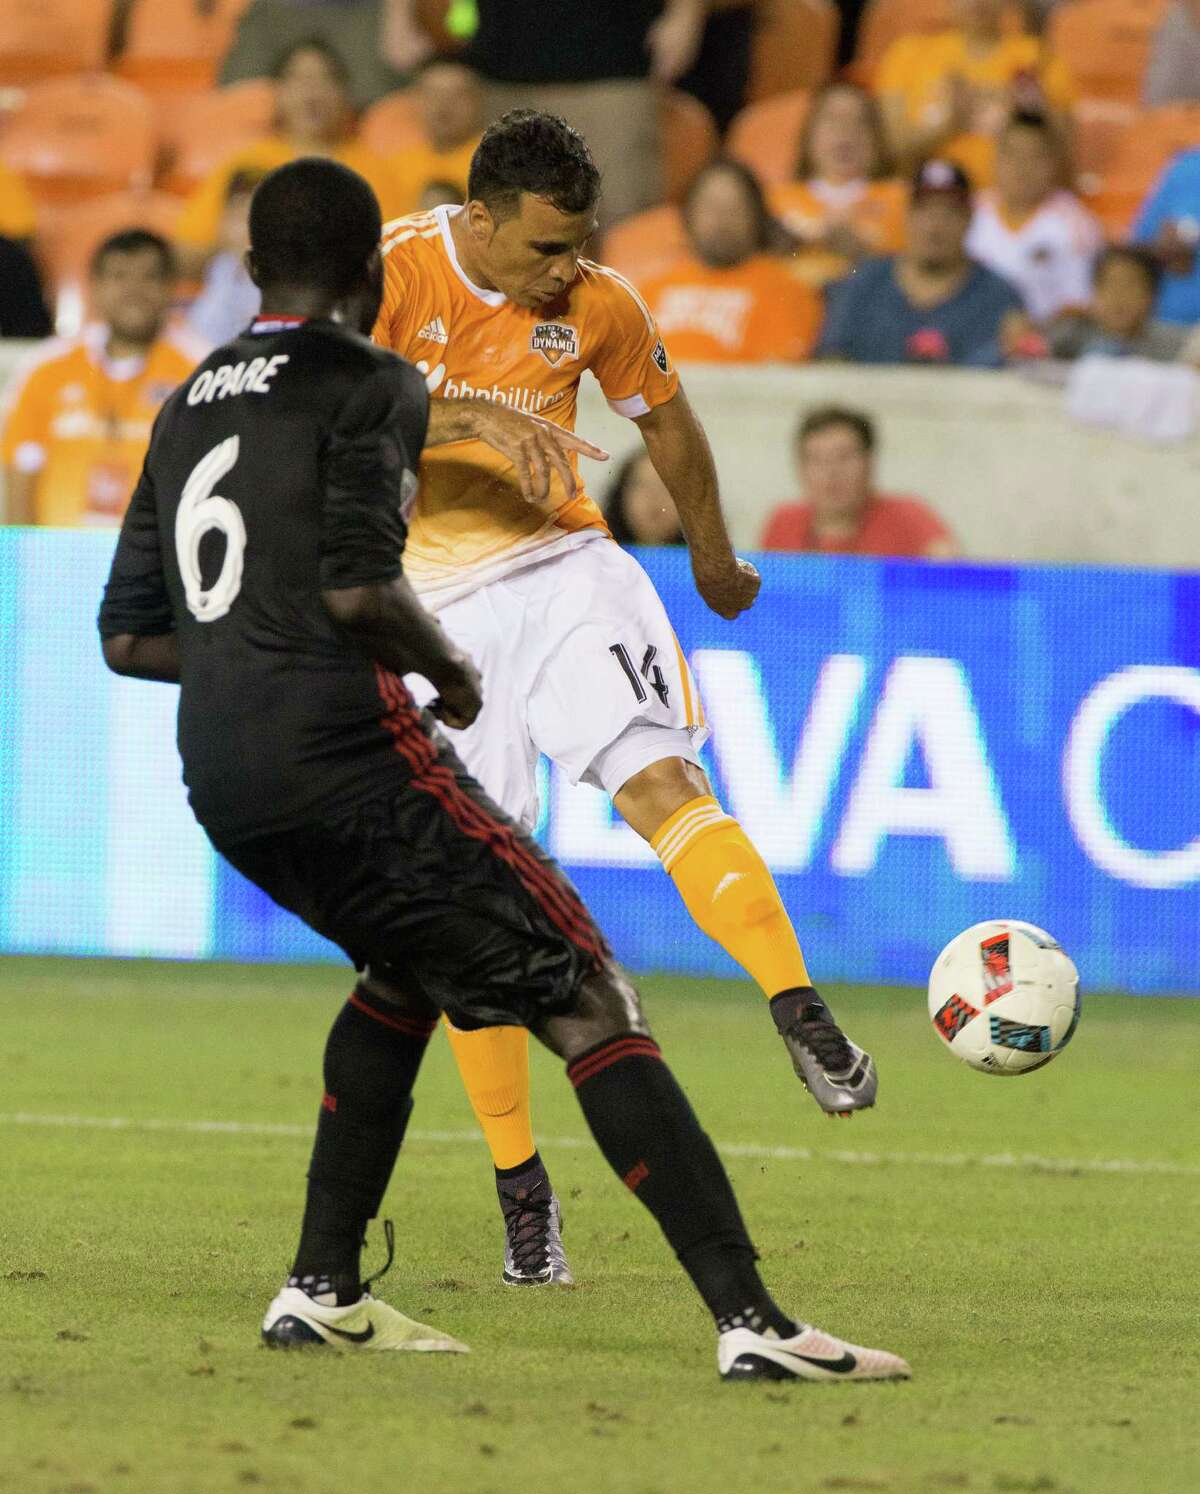 Houston Dynamo midfielder Alex (14) comes up short from kicking a goal in front of D.C. United defender Kofi Opare (6) during the second half of action between the Houston Dynamo and the D.C. United during a soccer game at BBVA Compass, Saturday, June 18, 2016, in Houston. Houston Dynamo tied D.C. United 0-0. ( Juan DeLeon / for the Houston Chronicle )